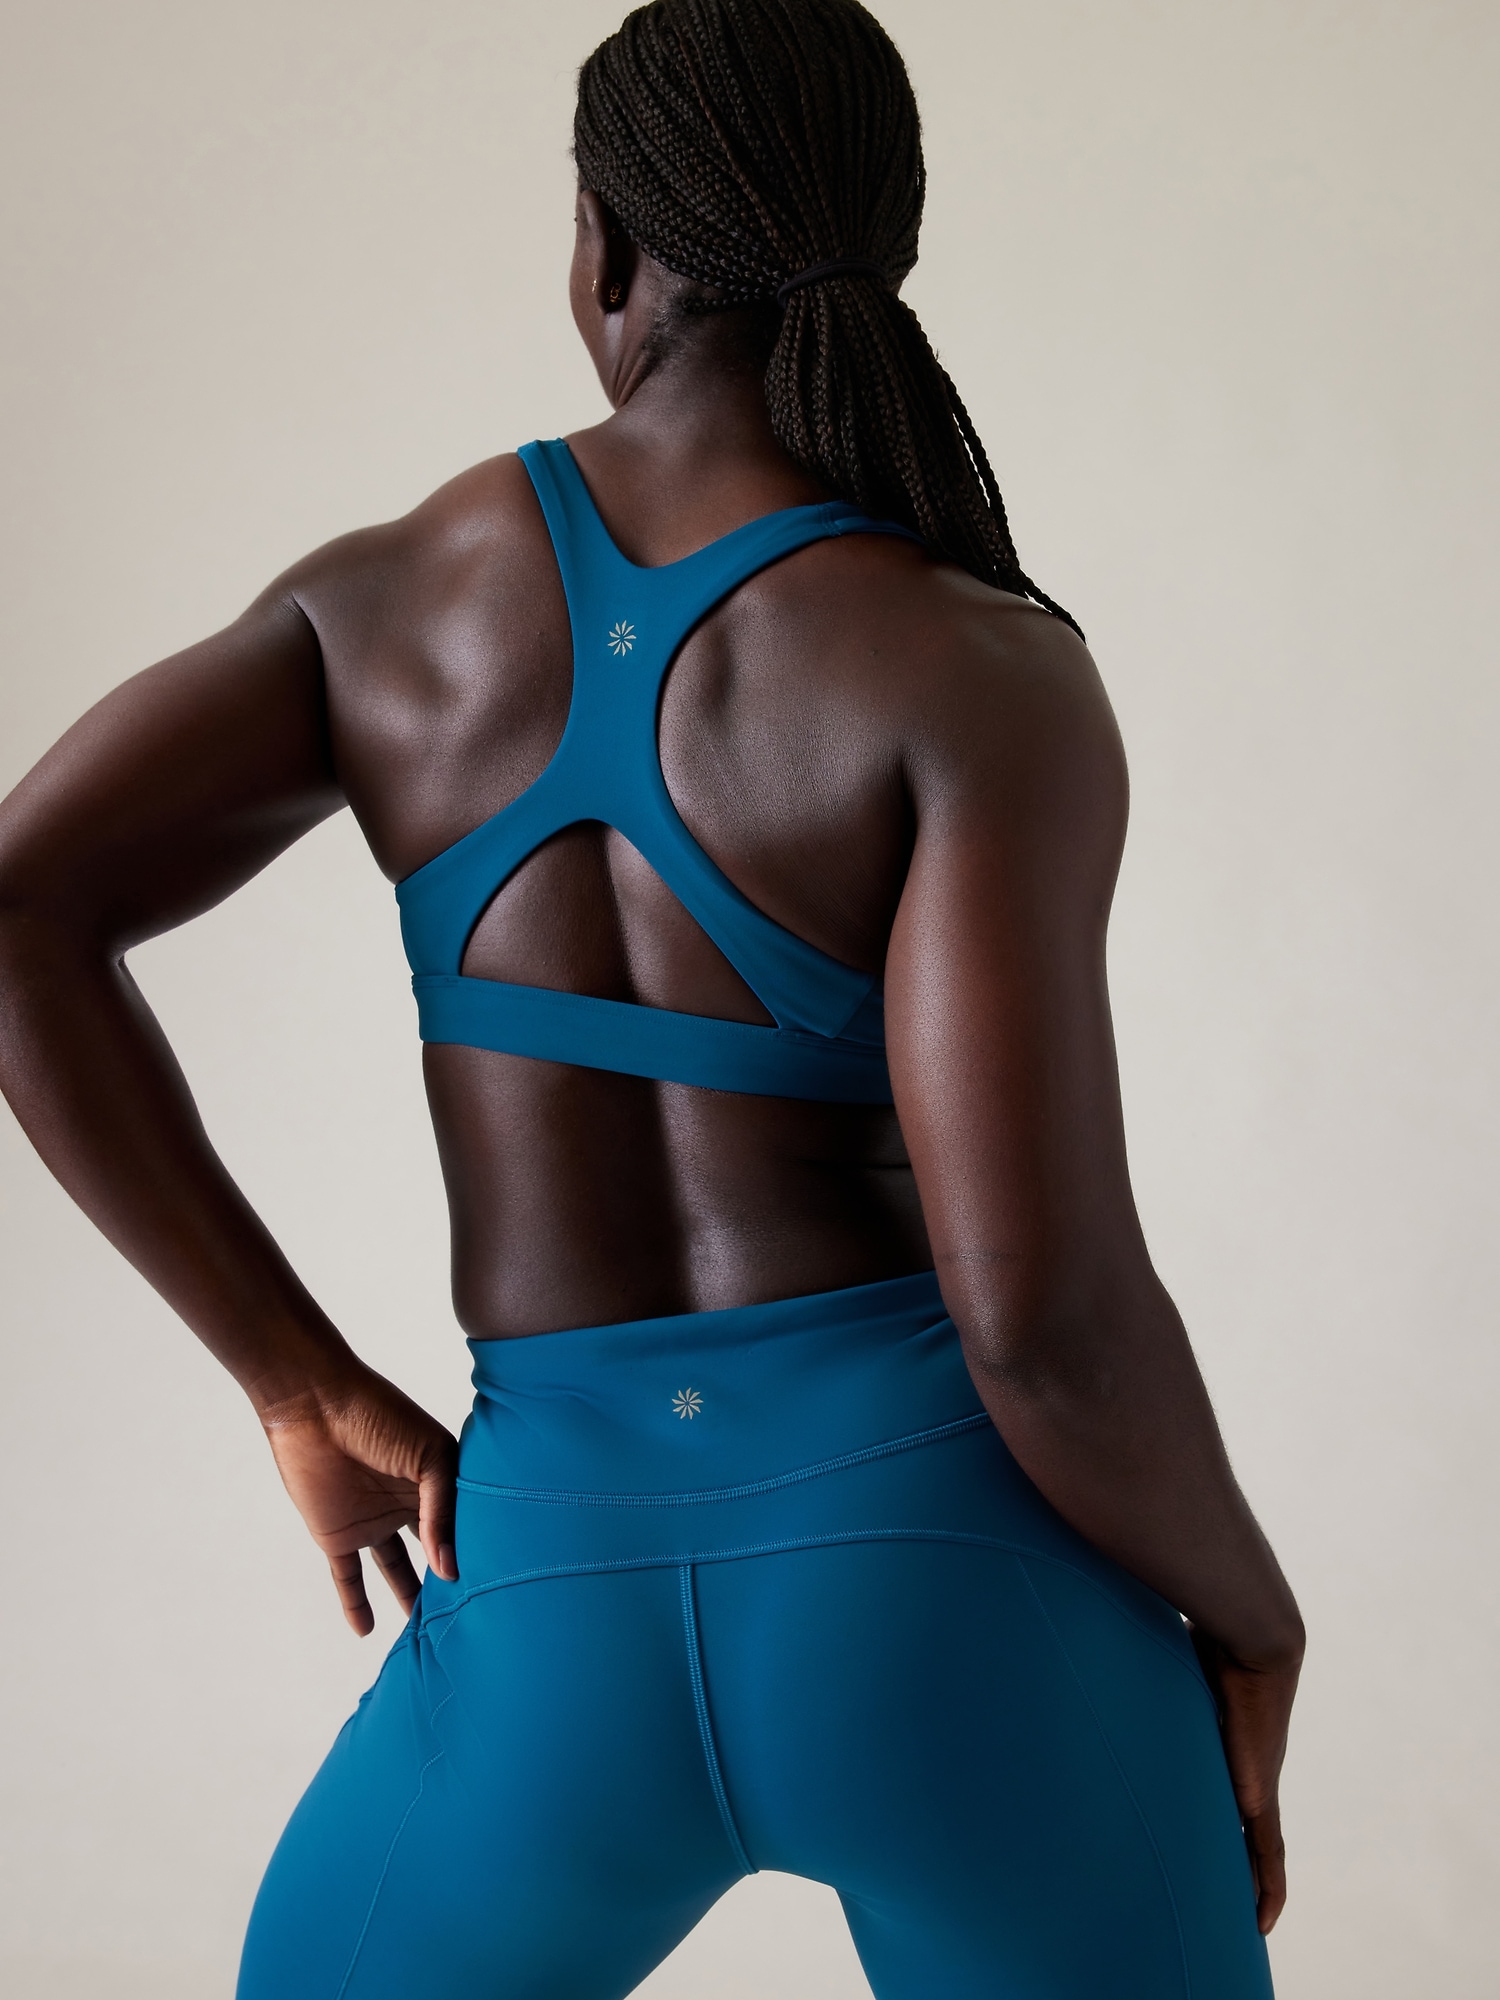 Lululemon time to sweat bra review-11 - Agent Athletica